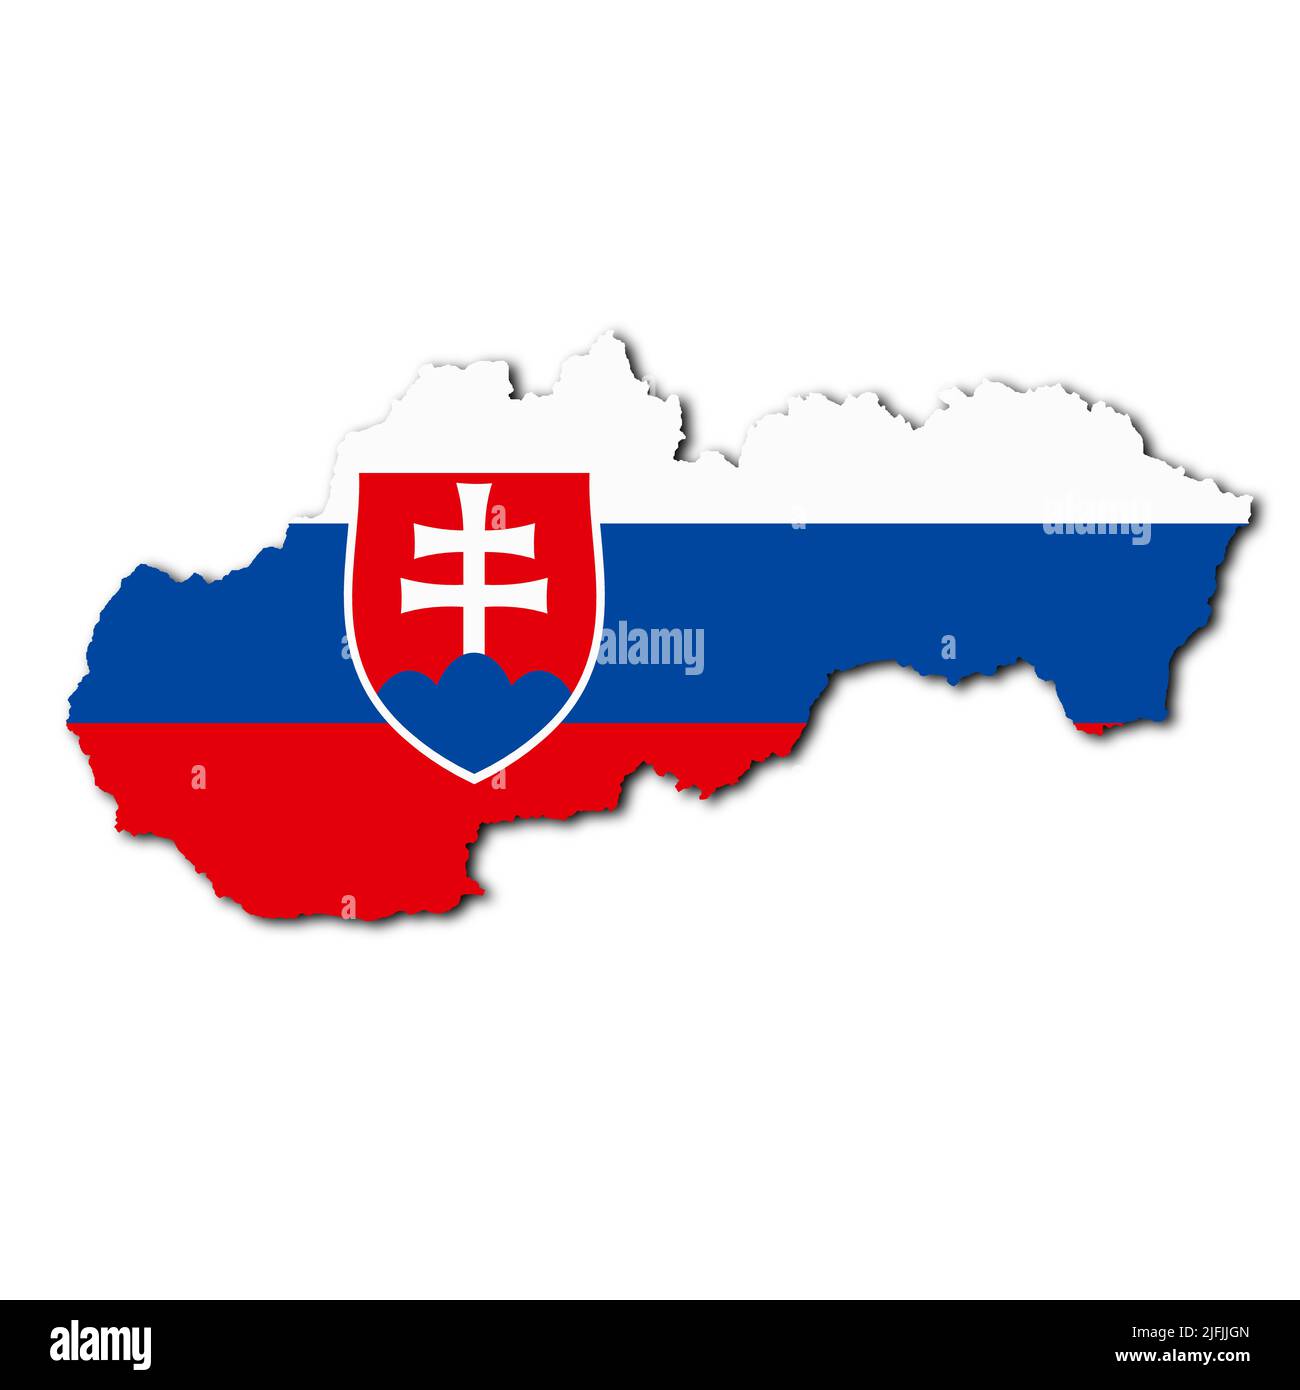 Slovakia map on white background with clipping path 3d illustration Stock Photo